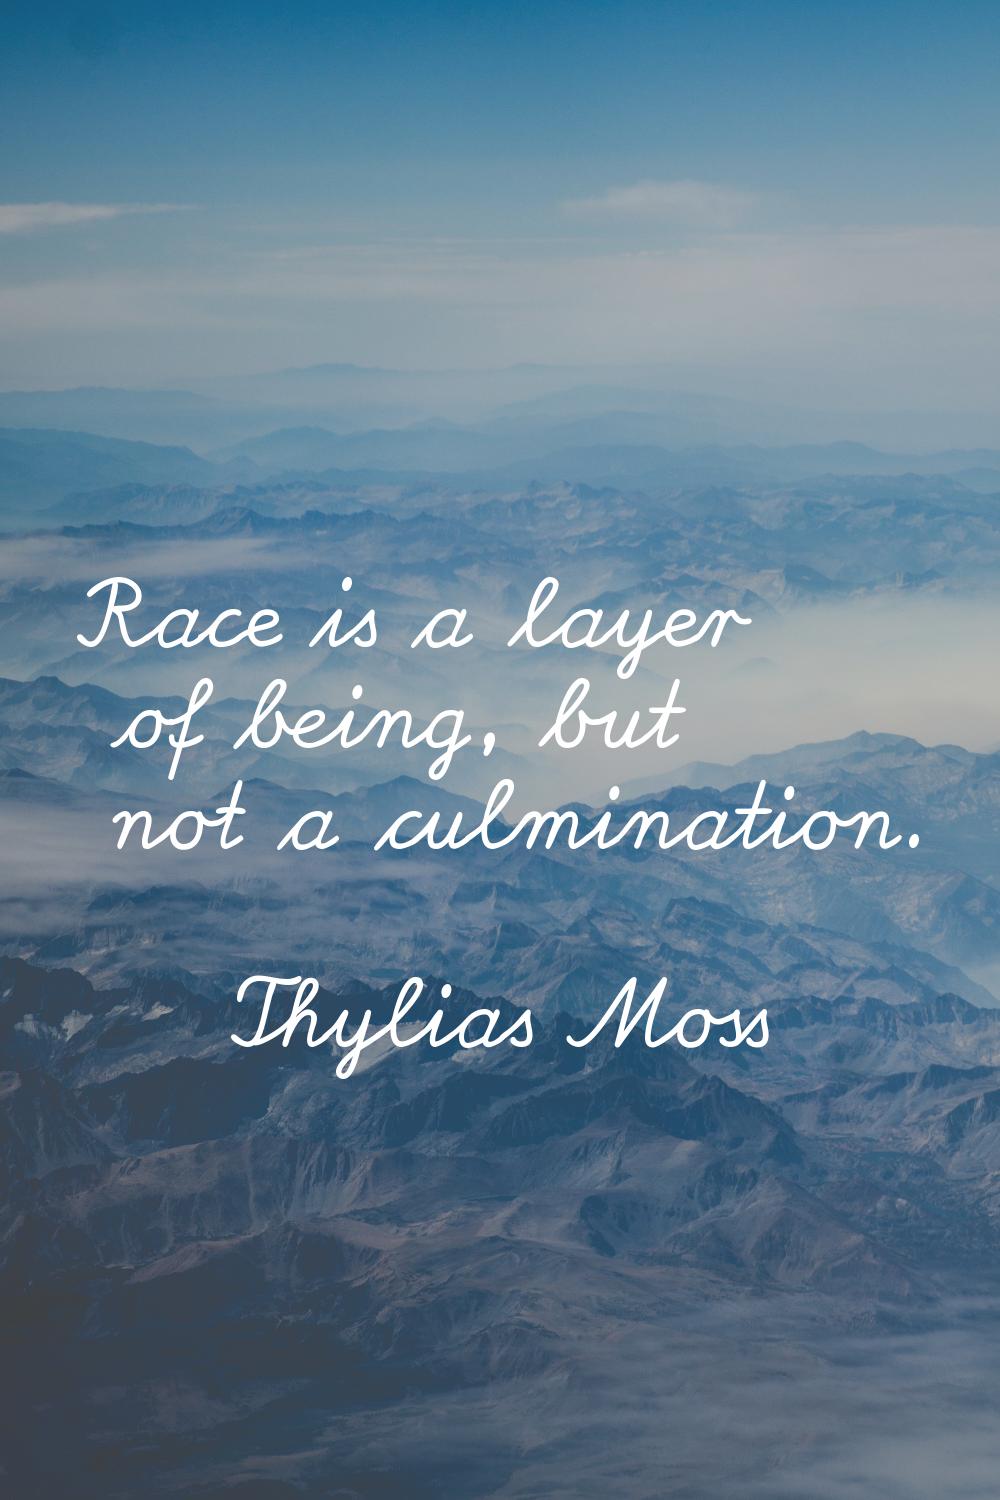 Race is a layer of being, but not a culmination.